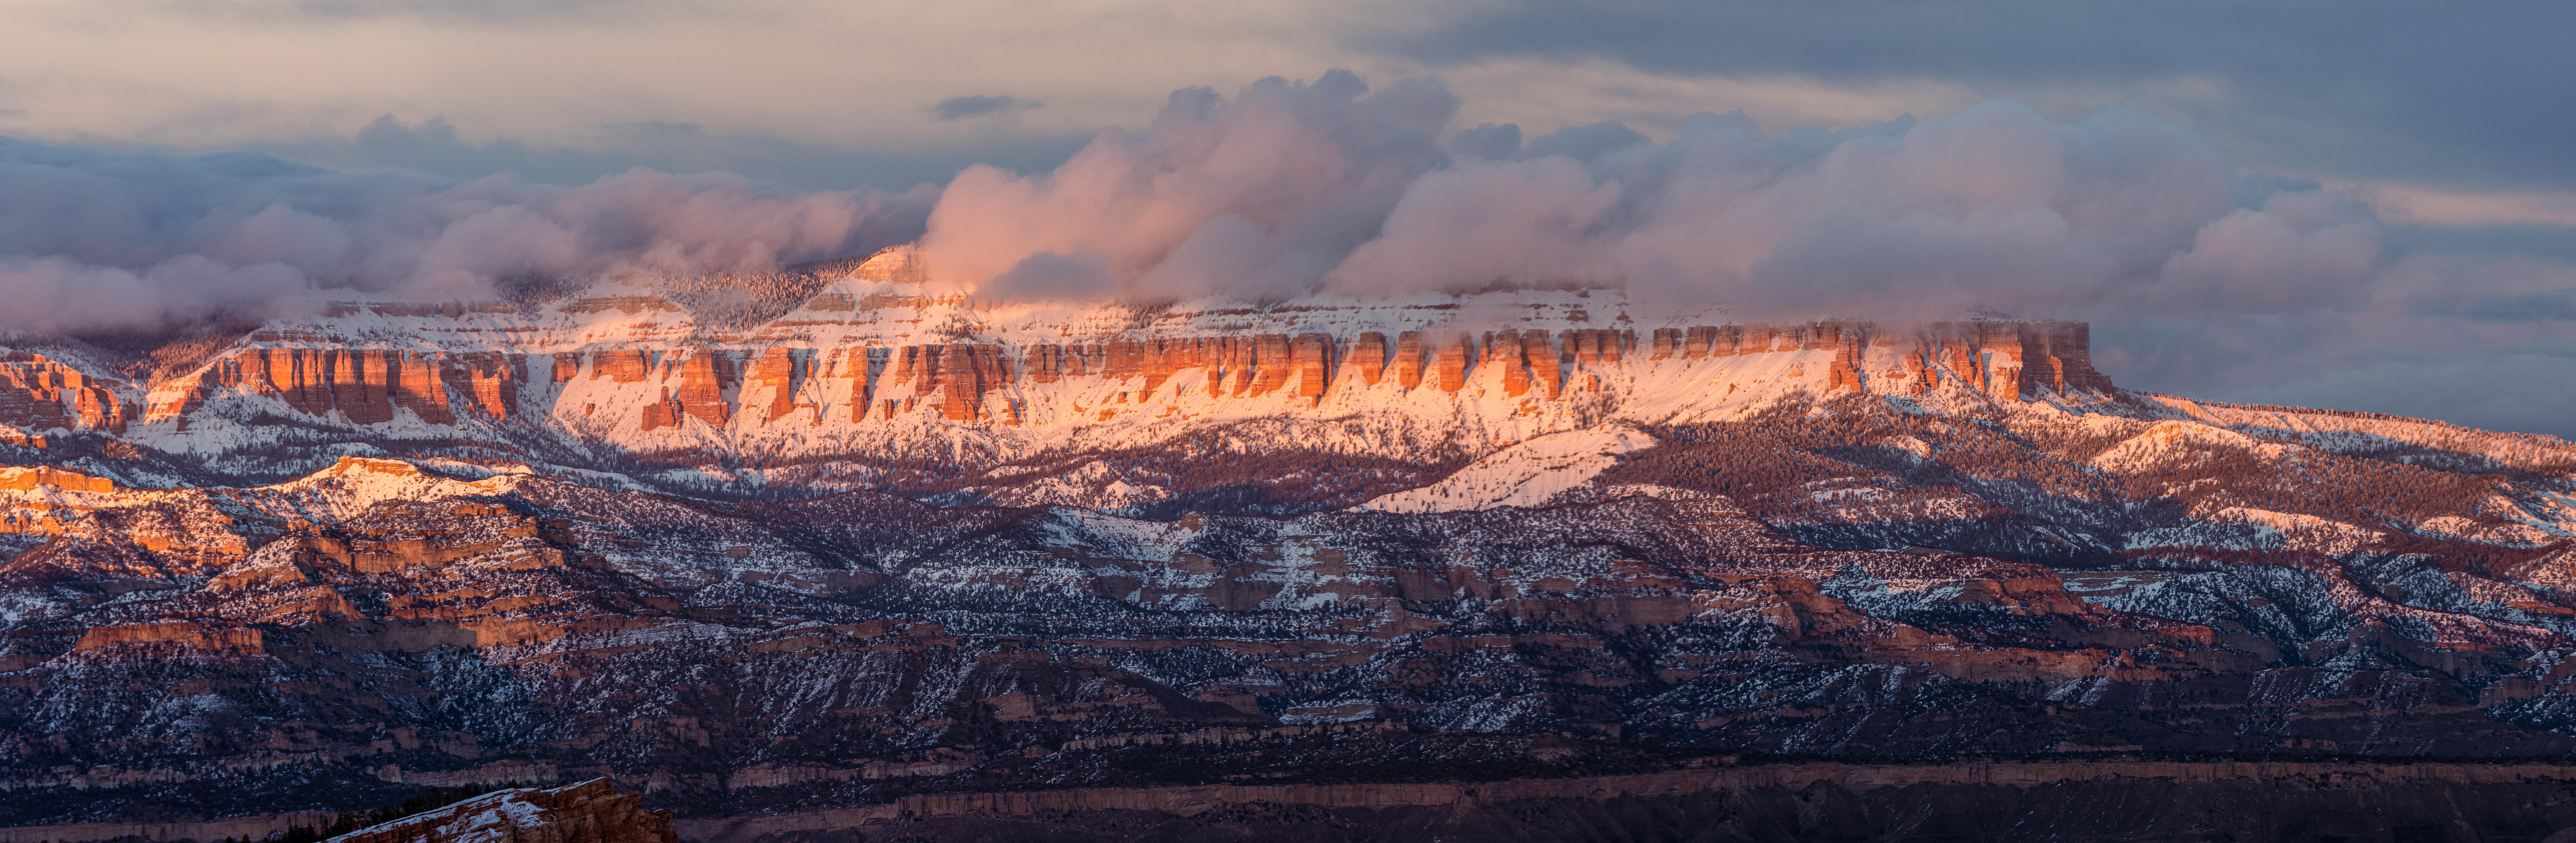 General 13404x4388 landscape nature snow clouds sunset canyon USA Bryce Canyon National Park sunset glow